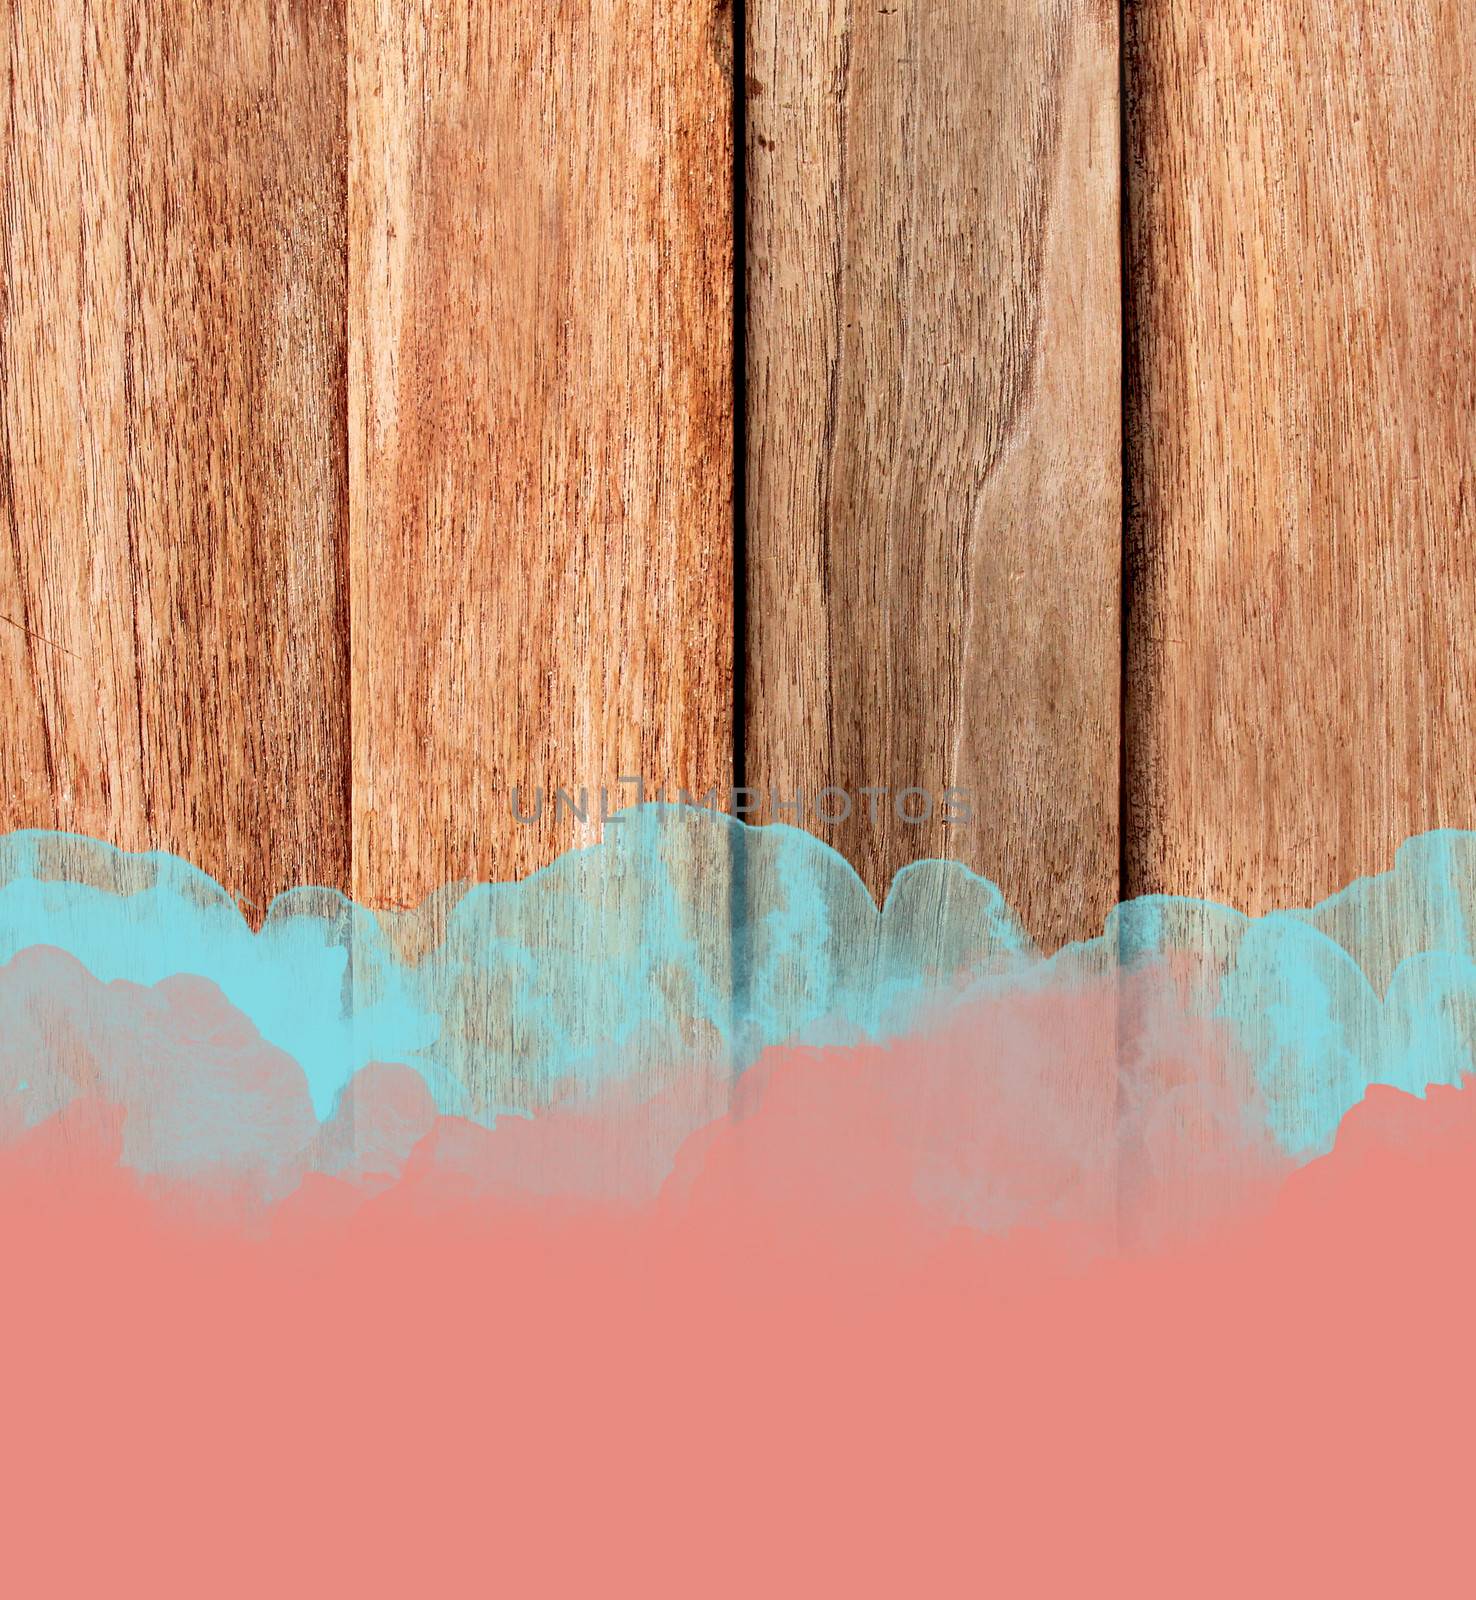 Blue and red stroke of the paint brush on wooden background 